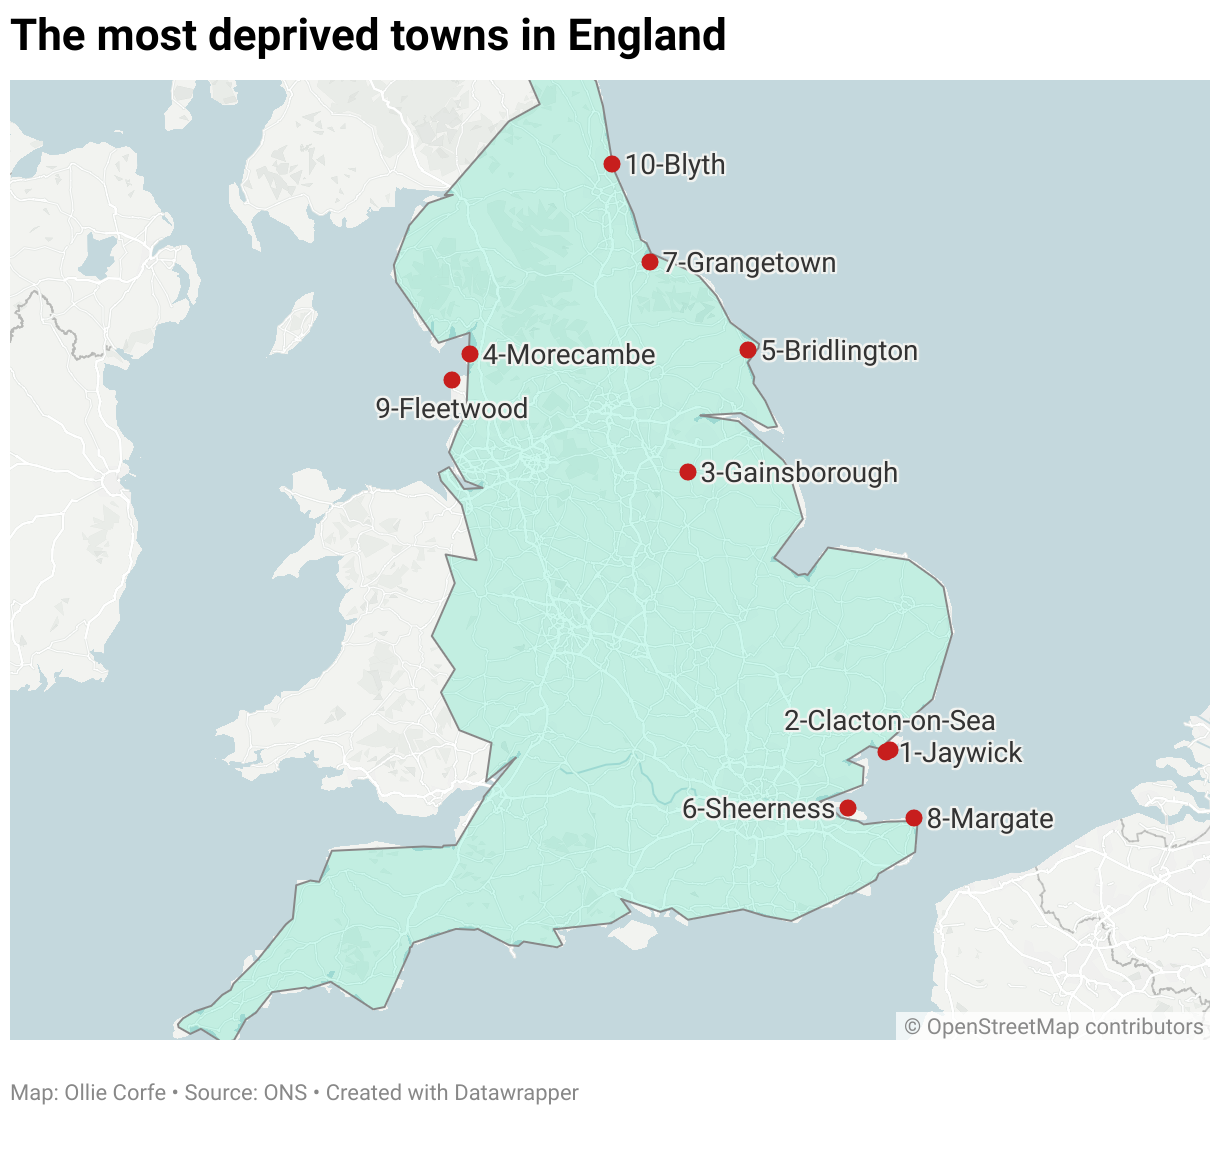 Map of deprived towns in England.